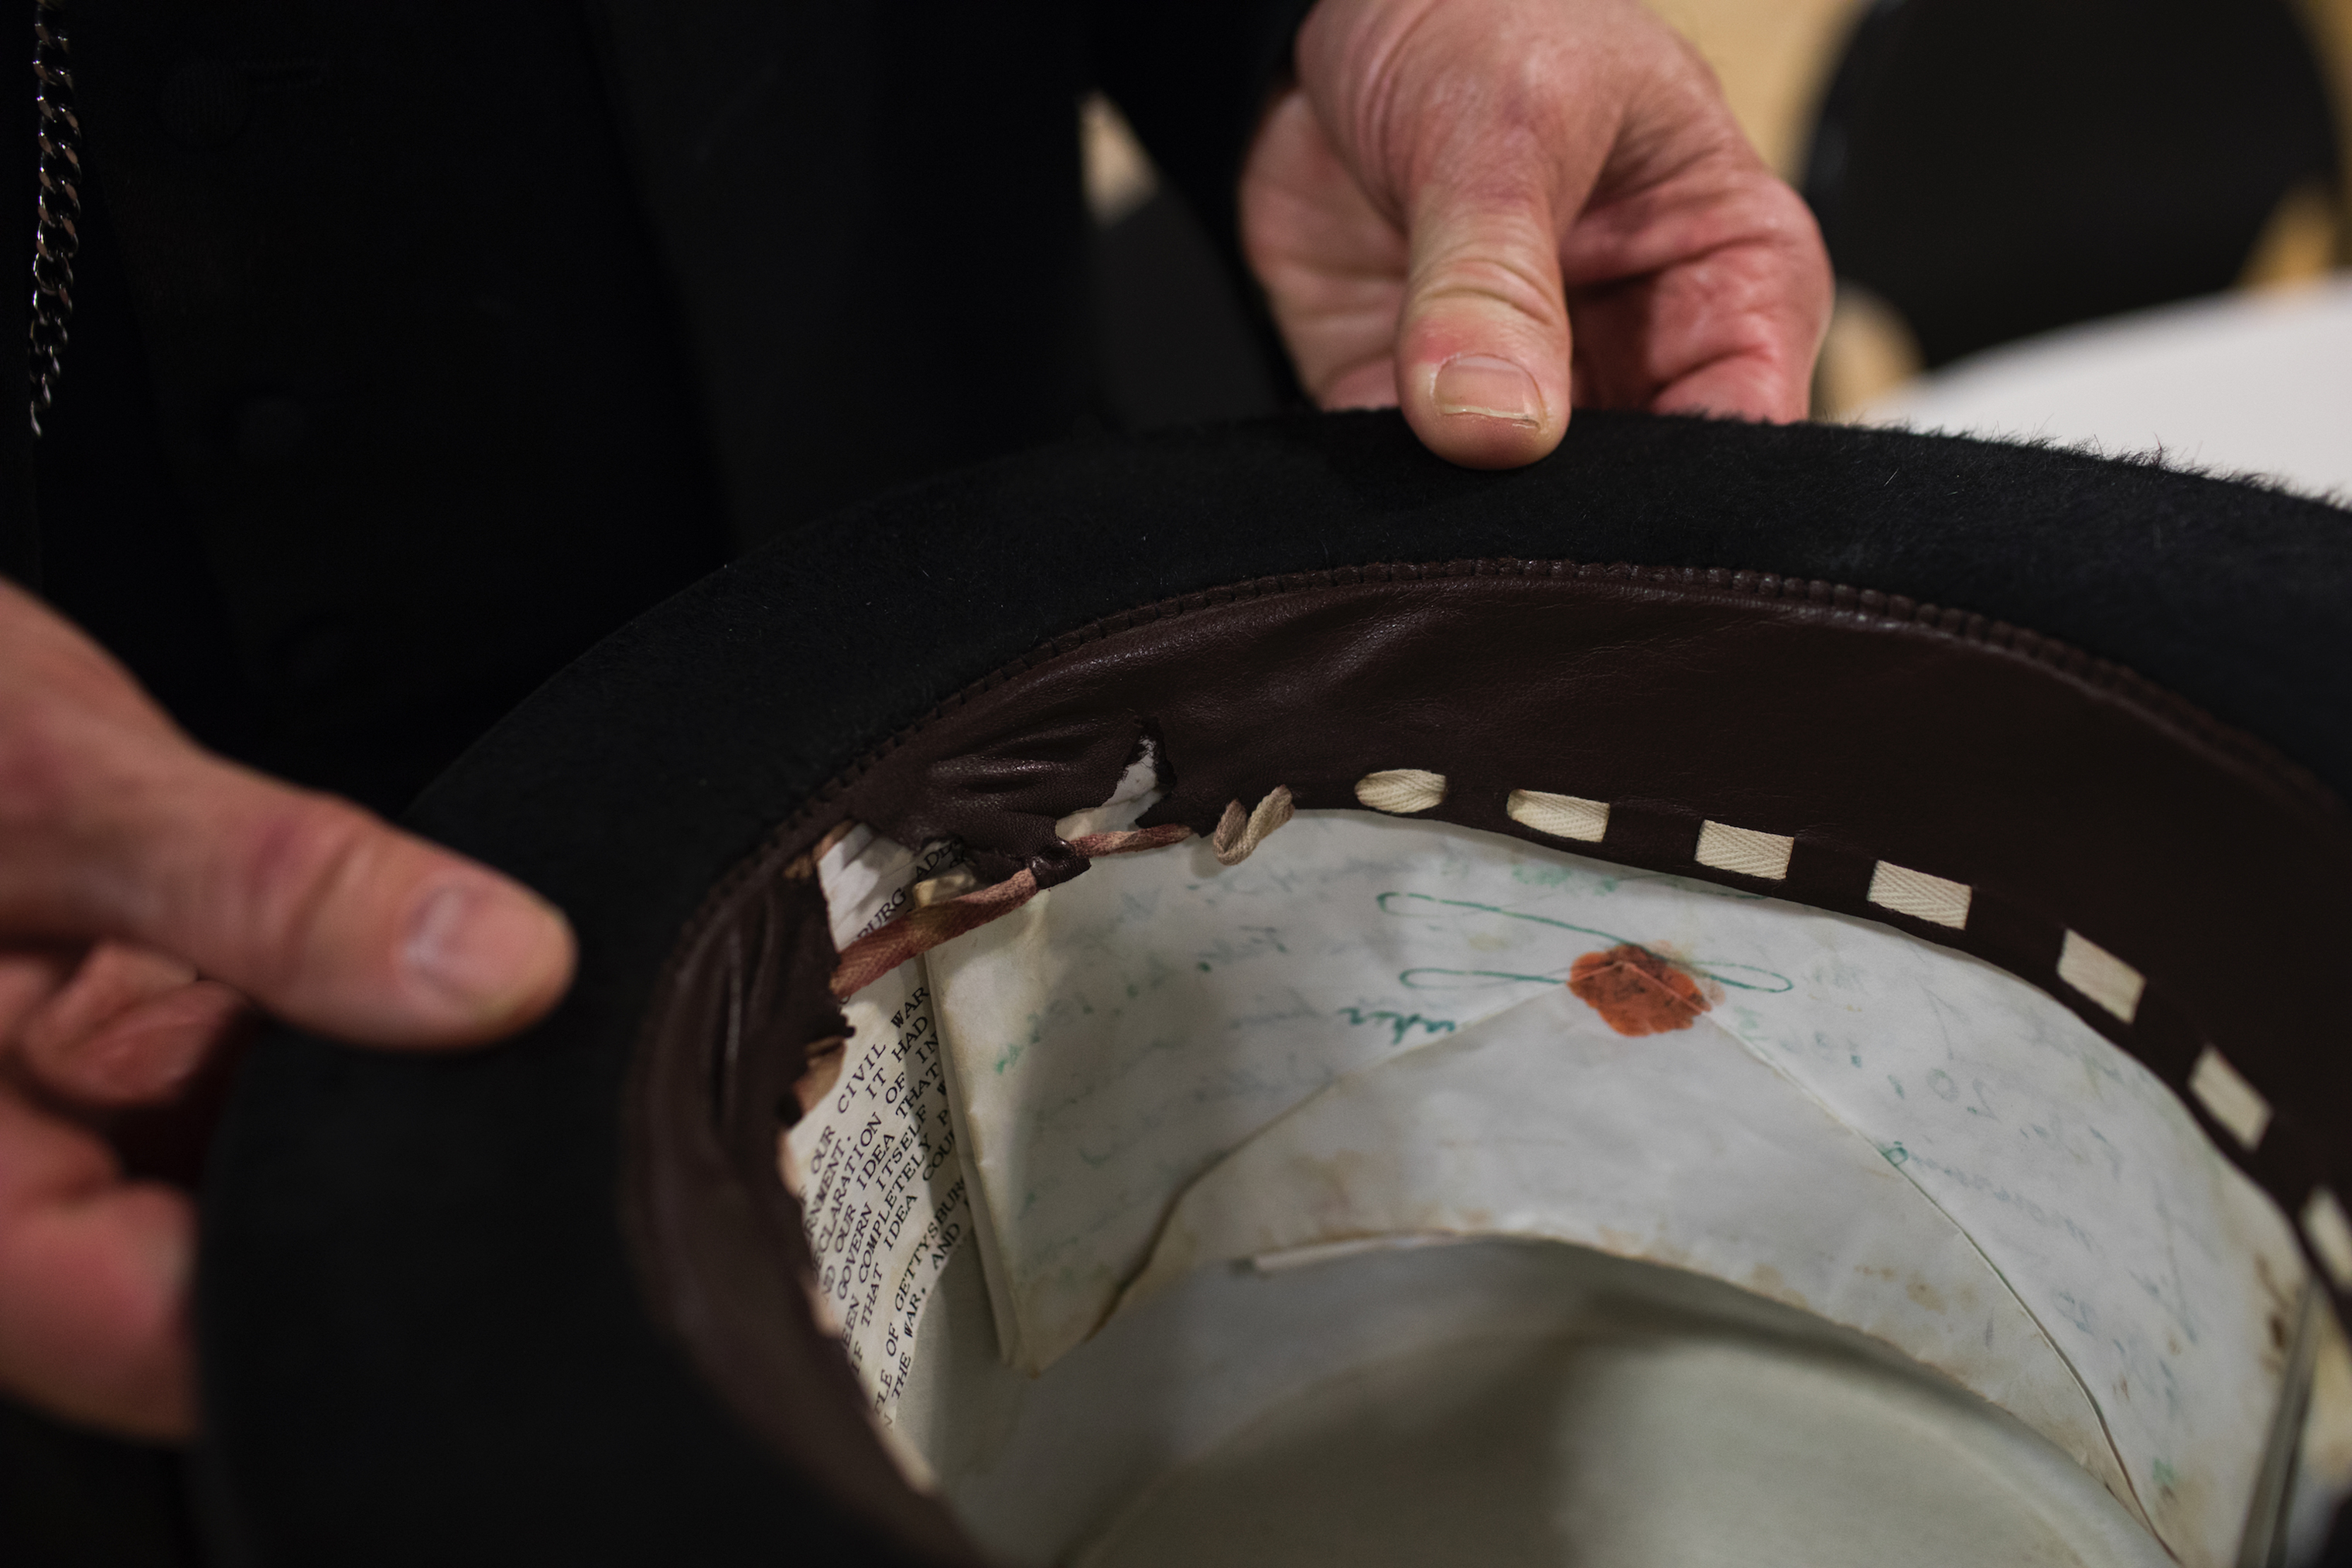 Abraham Lincoln used his hat to carry notes and letters. Almost every participant at the conference did the same. (Benjamin Norman for TIME)